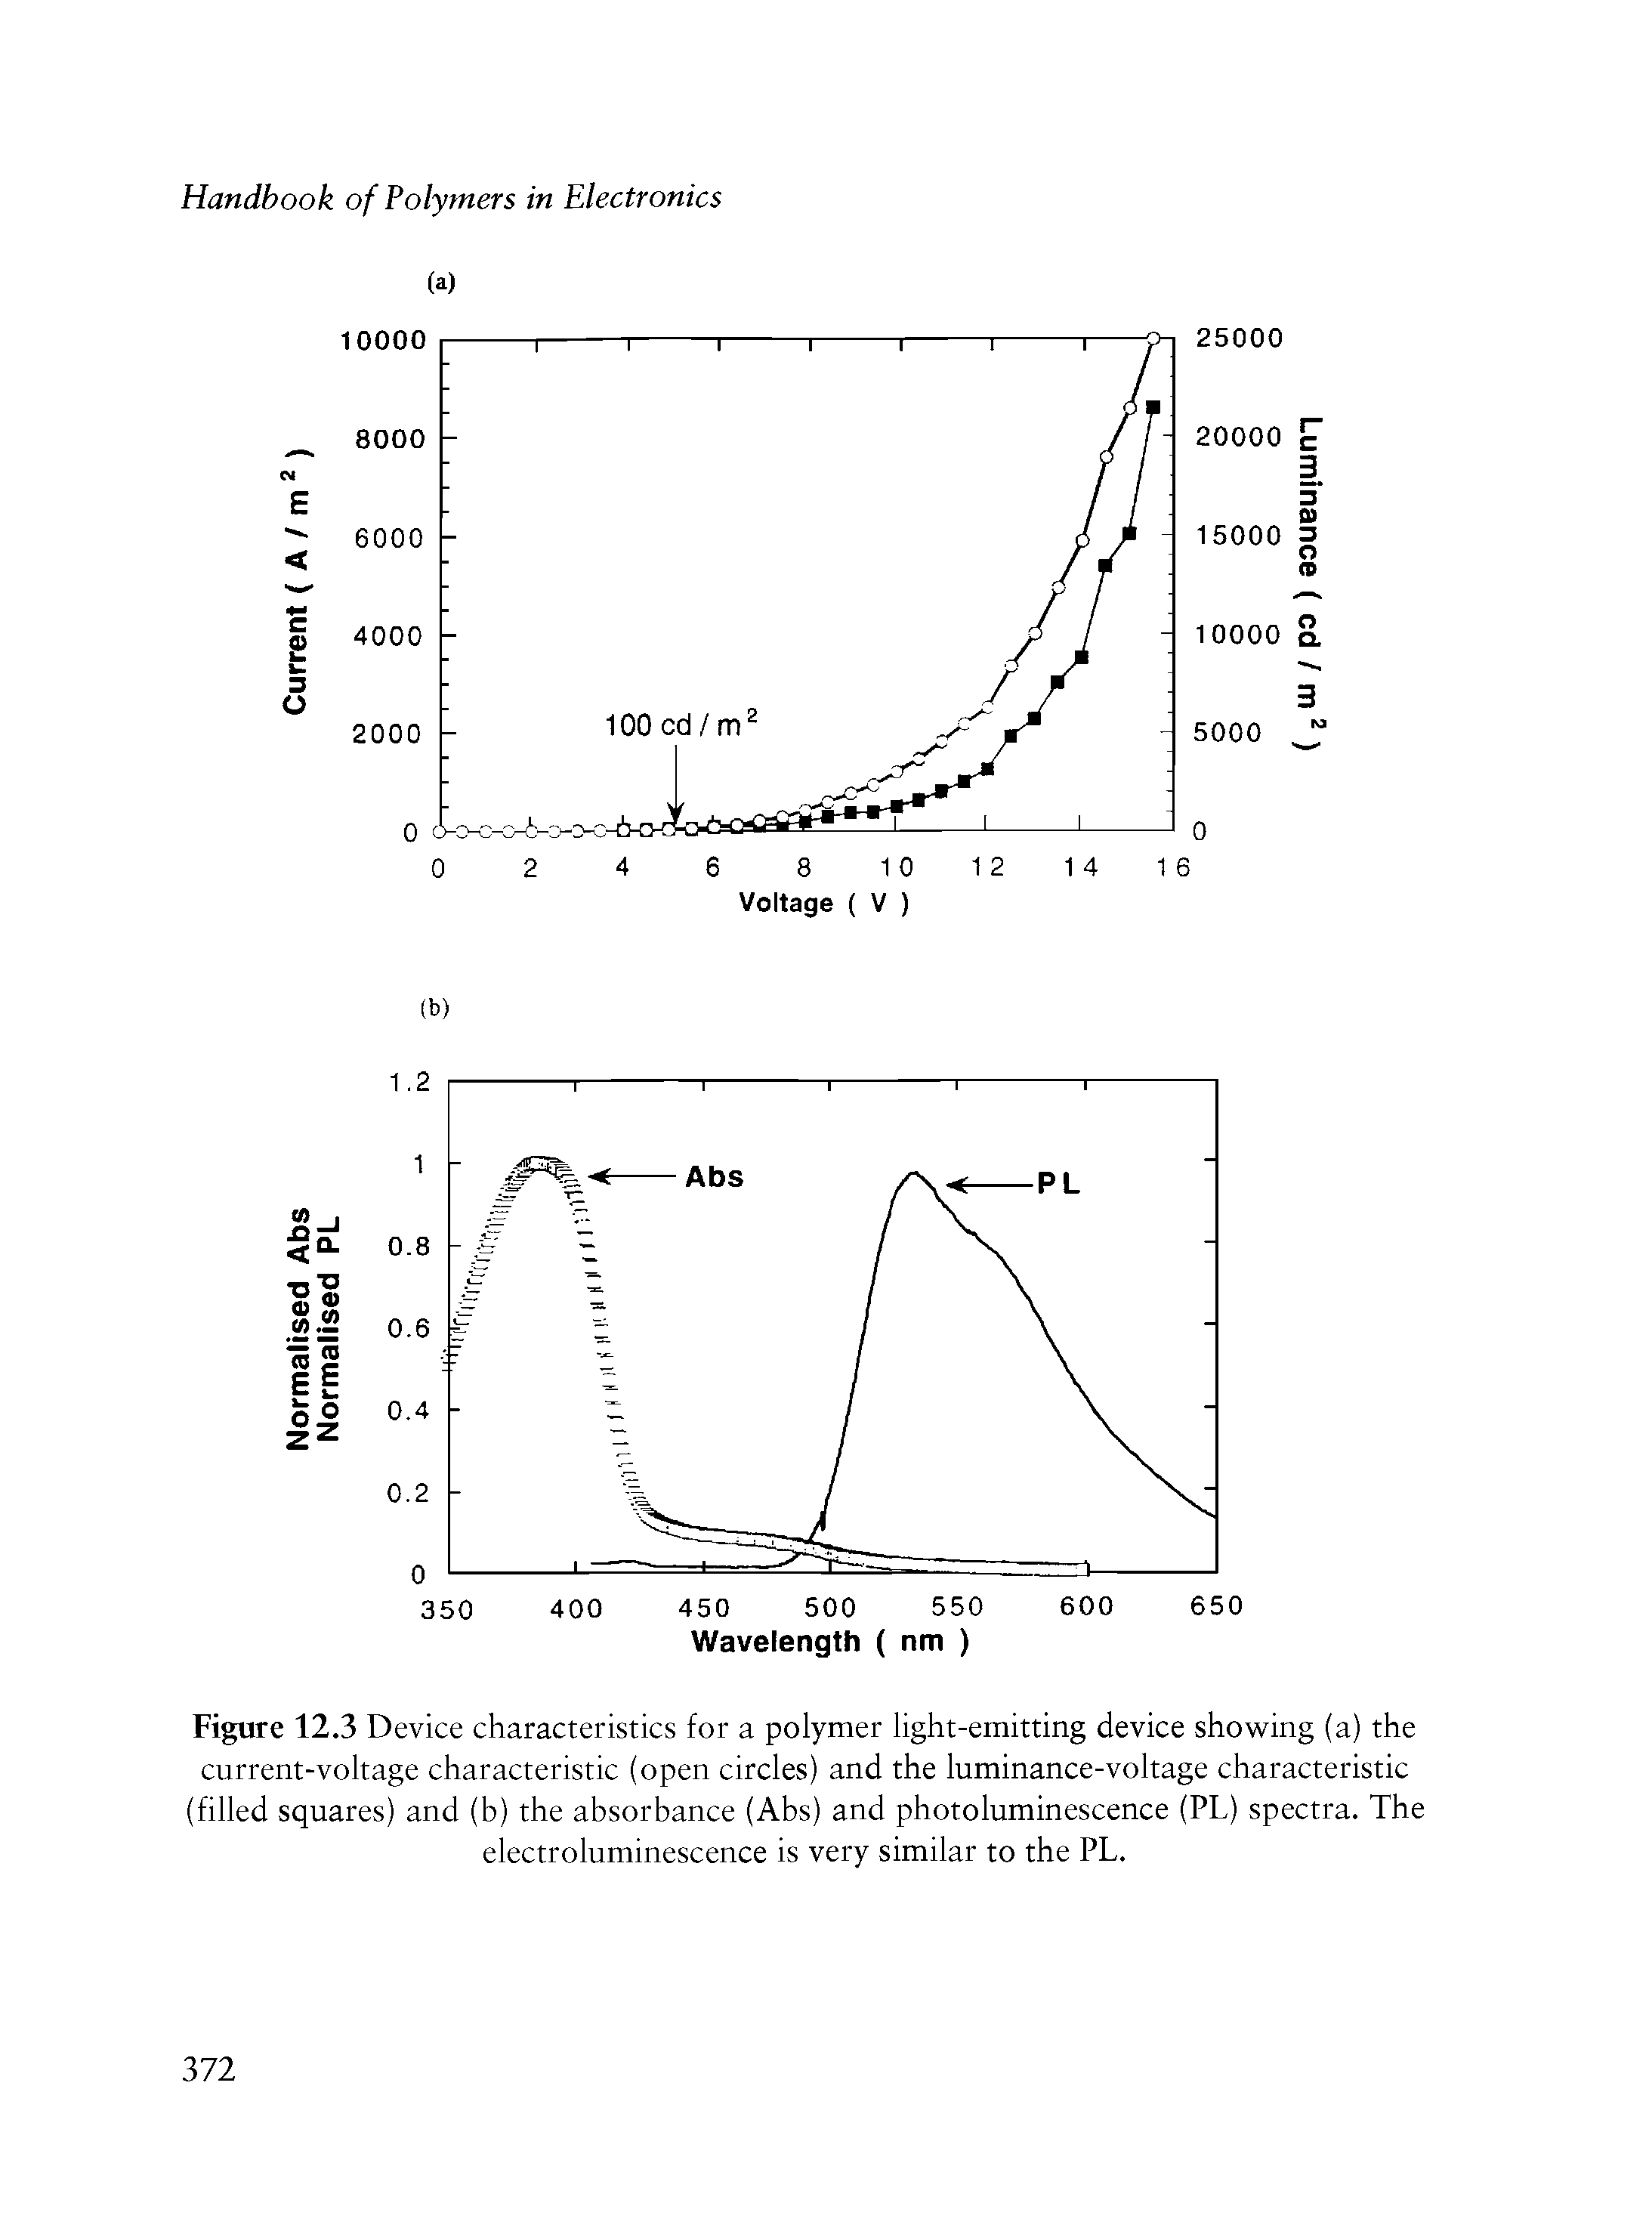 Figure 12.3 Device characteristics for a polymer light-emitting device showing (a) the current-voltage characteristic (open circles) and the luminance-voltage characteristic (filled squares) and (h) the ahsorhance (Ahs) and photoluminescence (PL) spectra. The electroluminescence is very similar to the PL.